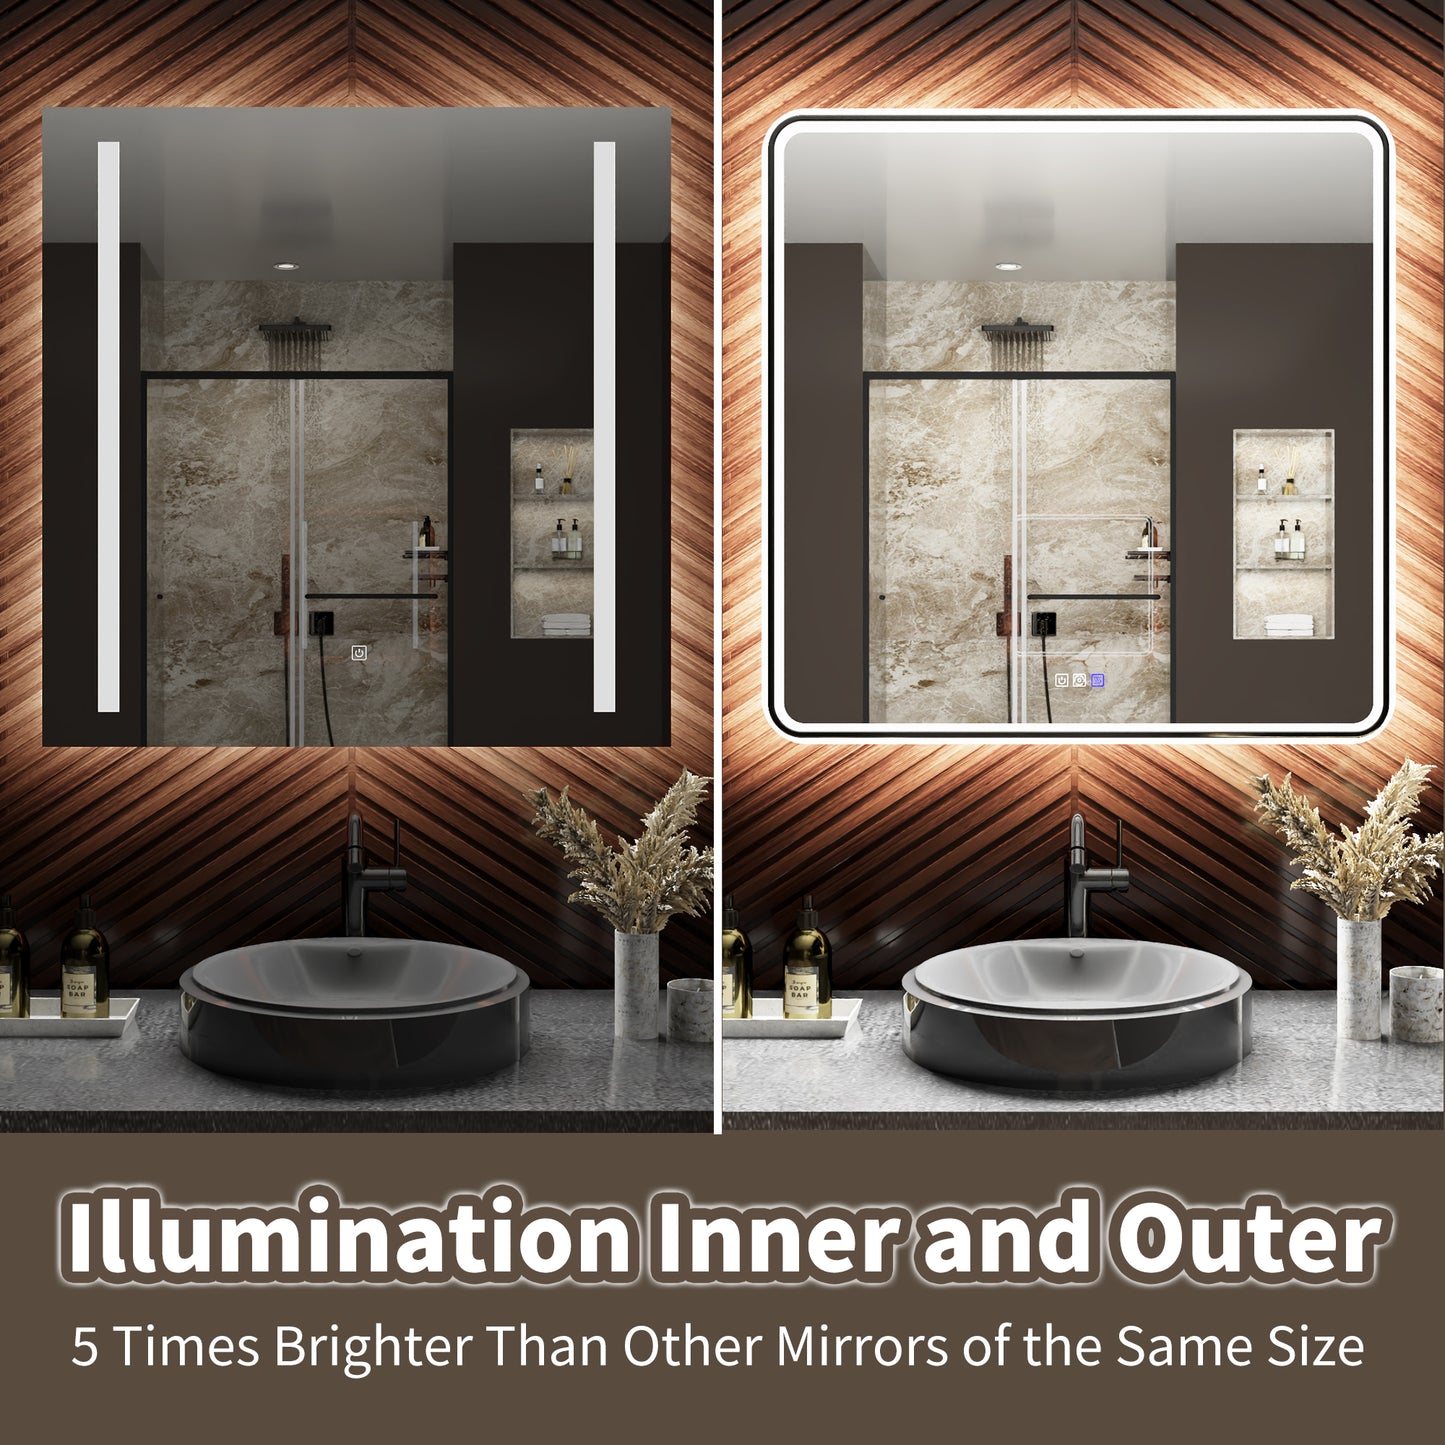 Lumina 48" W x 30" H LED Lighted Bathroom Mirror,High Illuminate, Inner & Outer Lighting,Anti-Fog, Dimmable,Black Frame with Rounded Corners